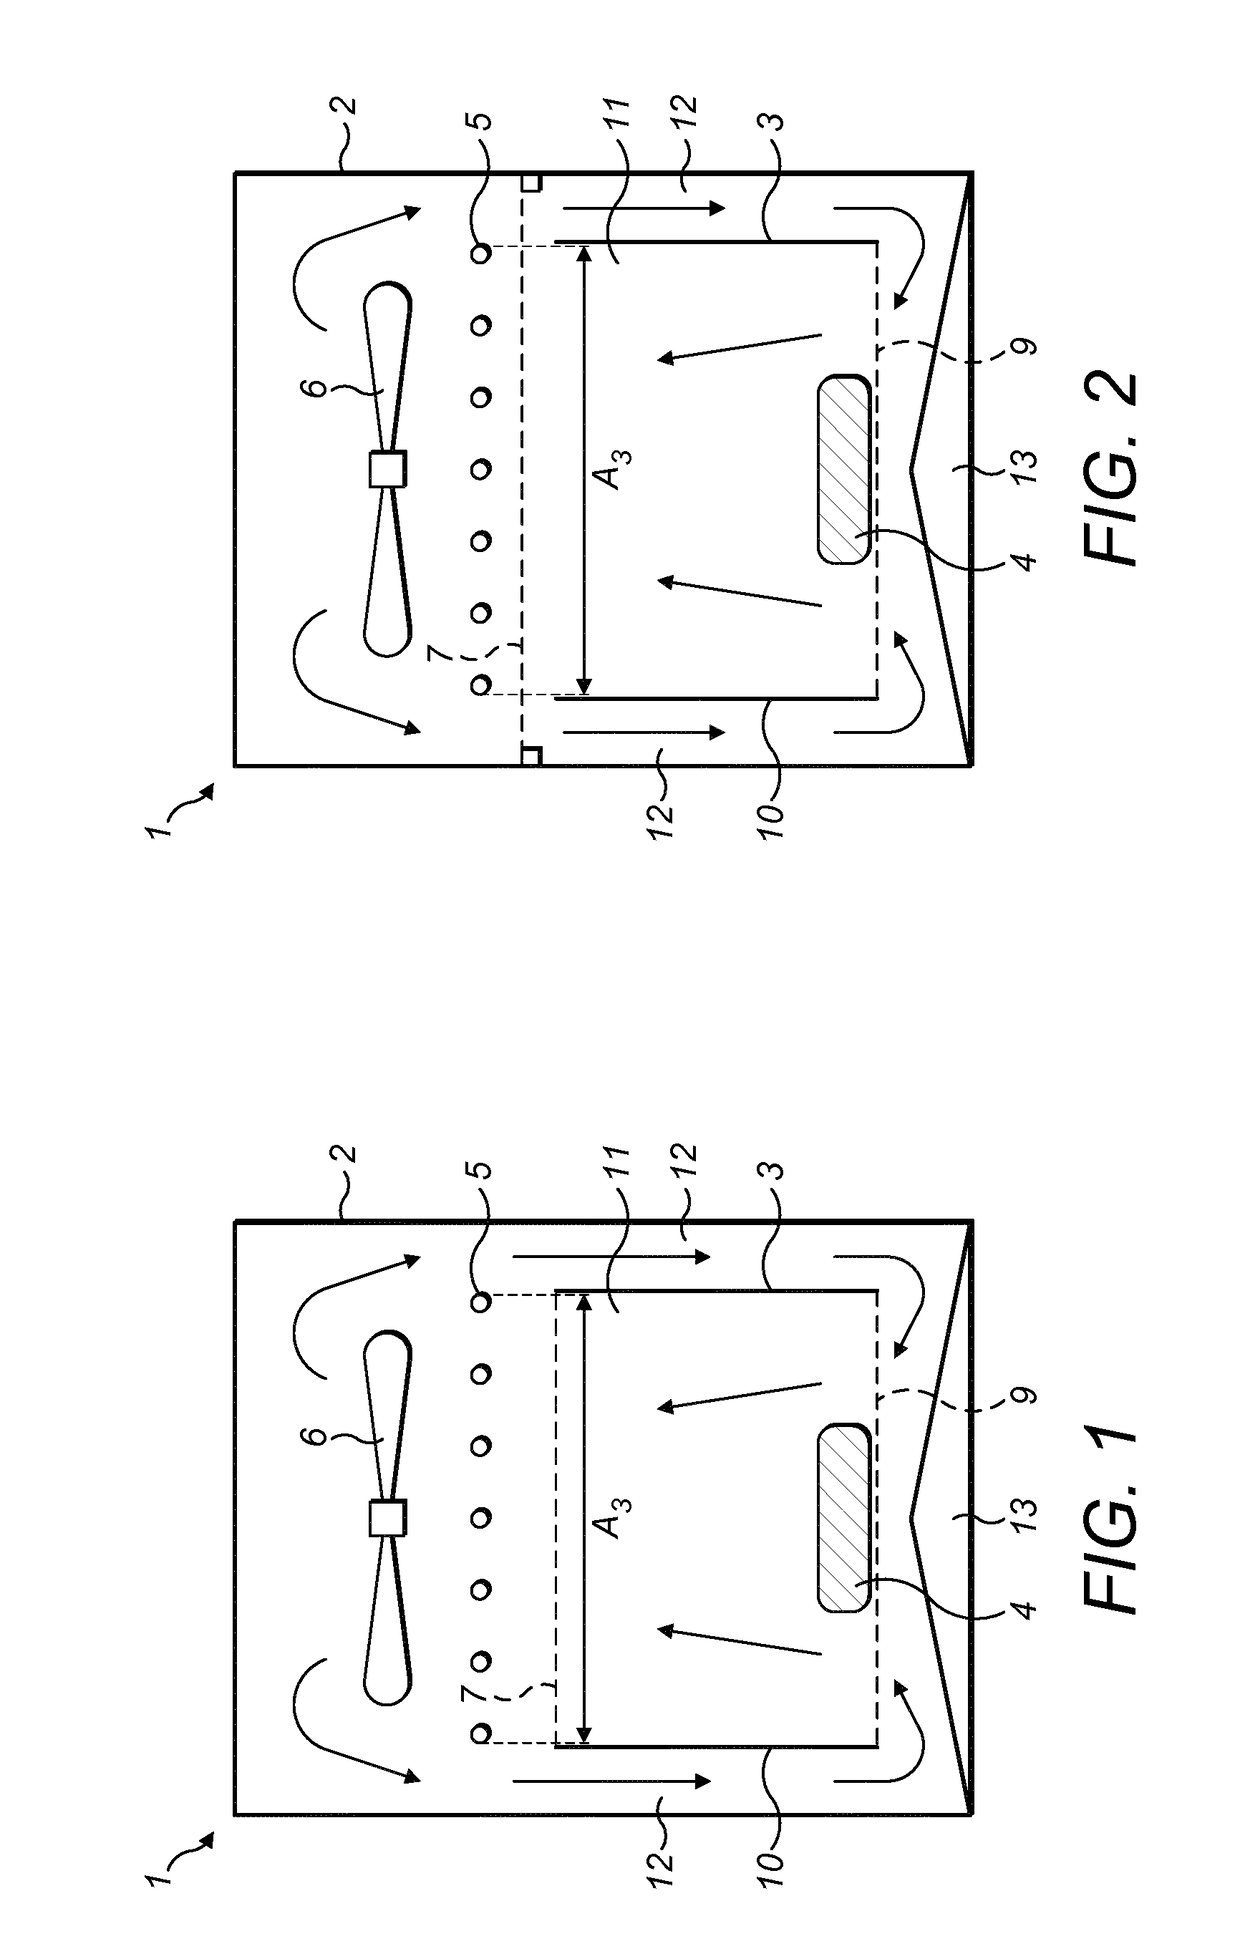 Cooking apparatus with filter element